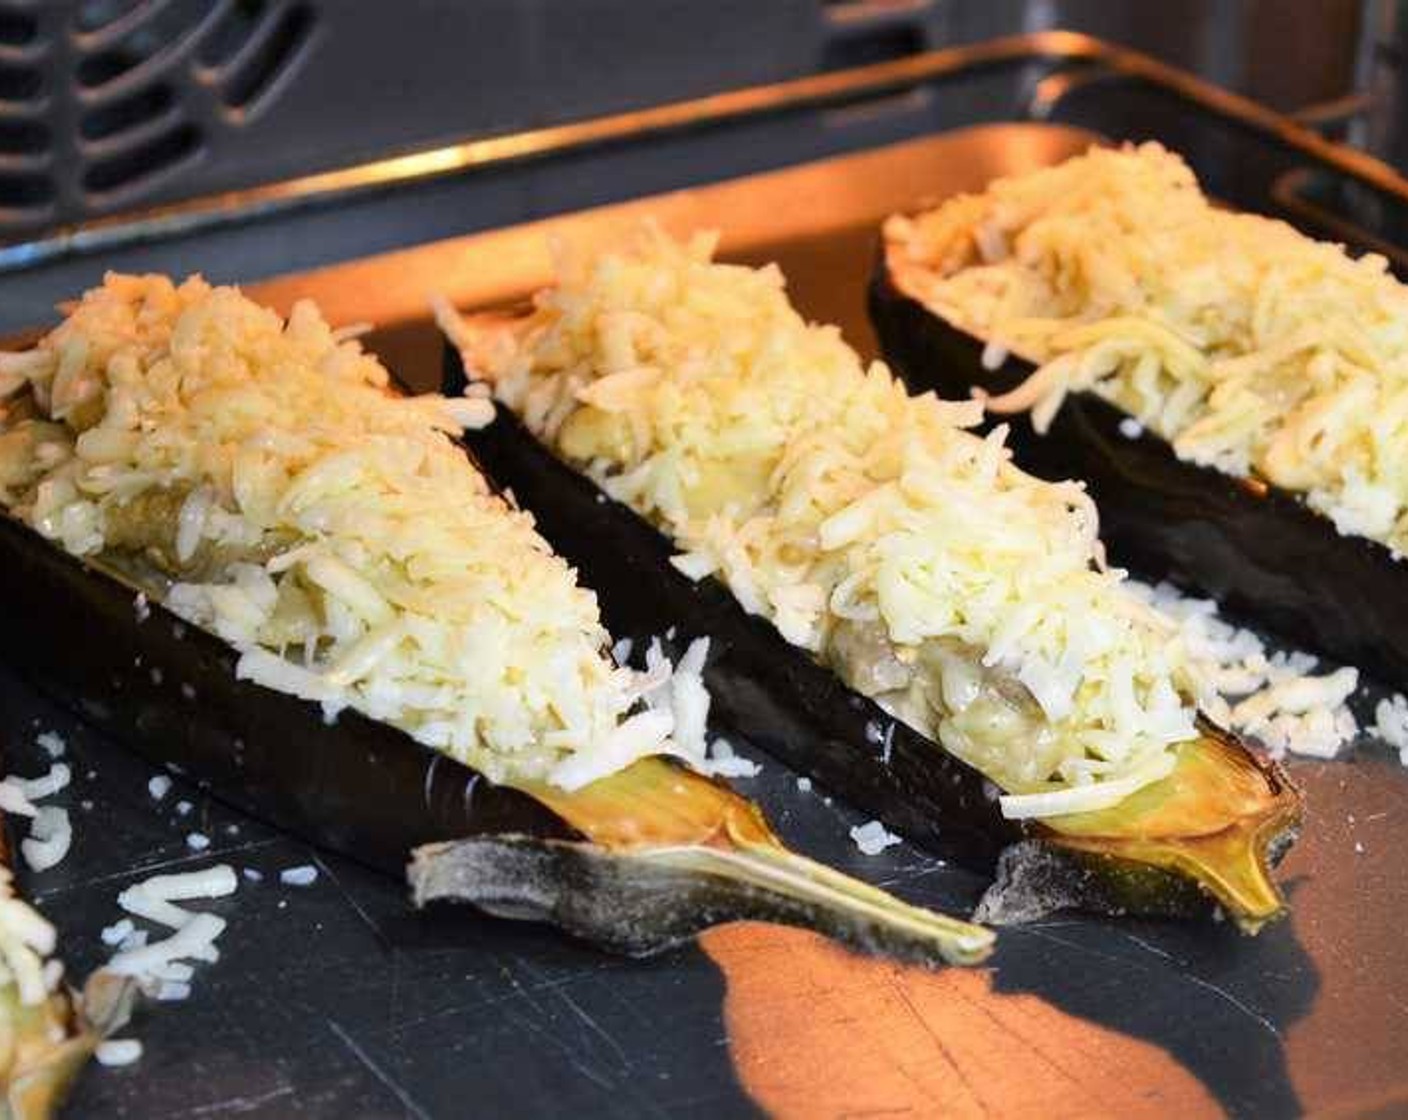 step 12 Turn the oven to broil at 400 degrees F (200 degrees C) and place the stuffed eggplants in.